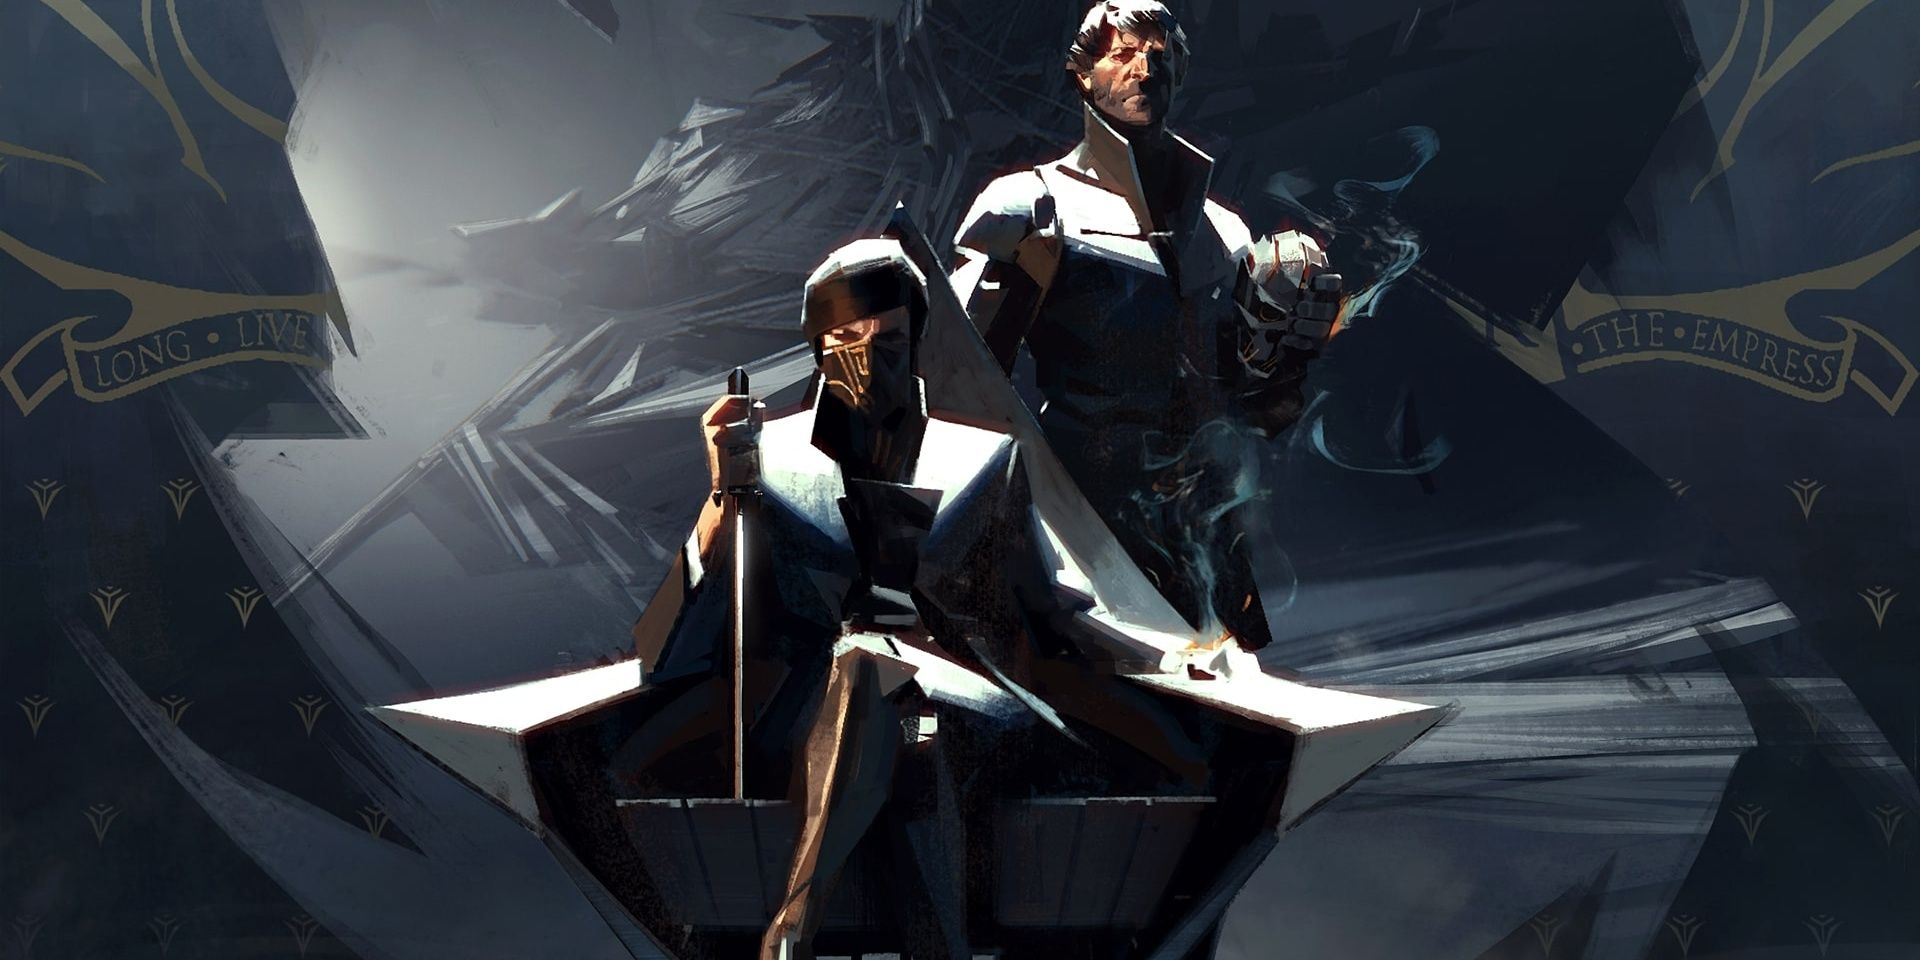 Dishonored II News - Dishonored 2 Dev Reveals Details On Quick-Saves, Mods  And Co-op Play